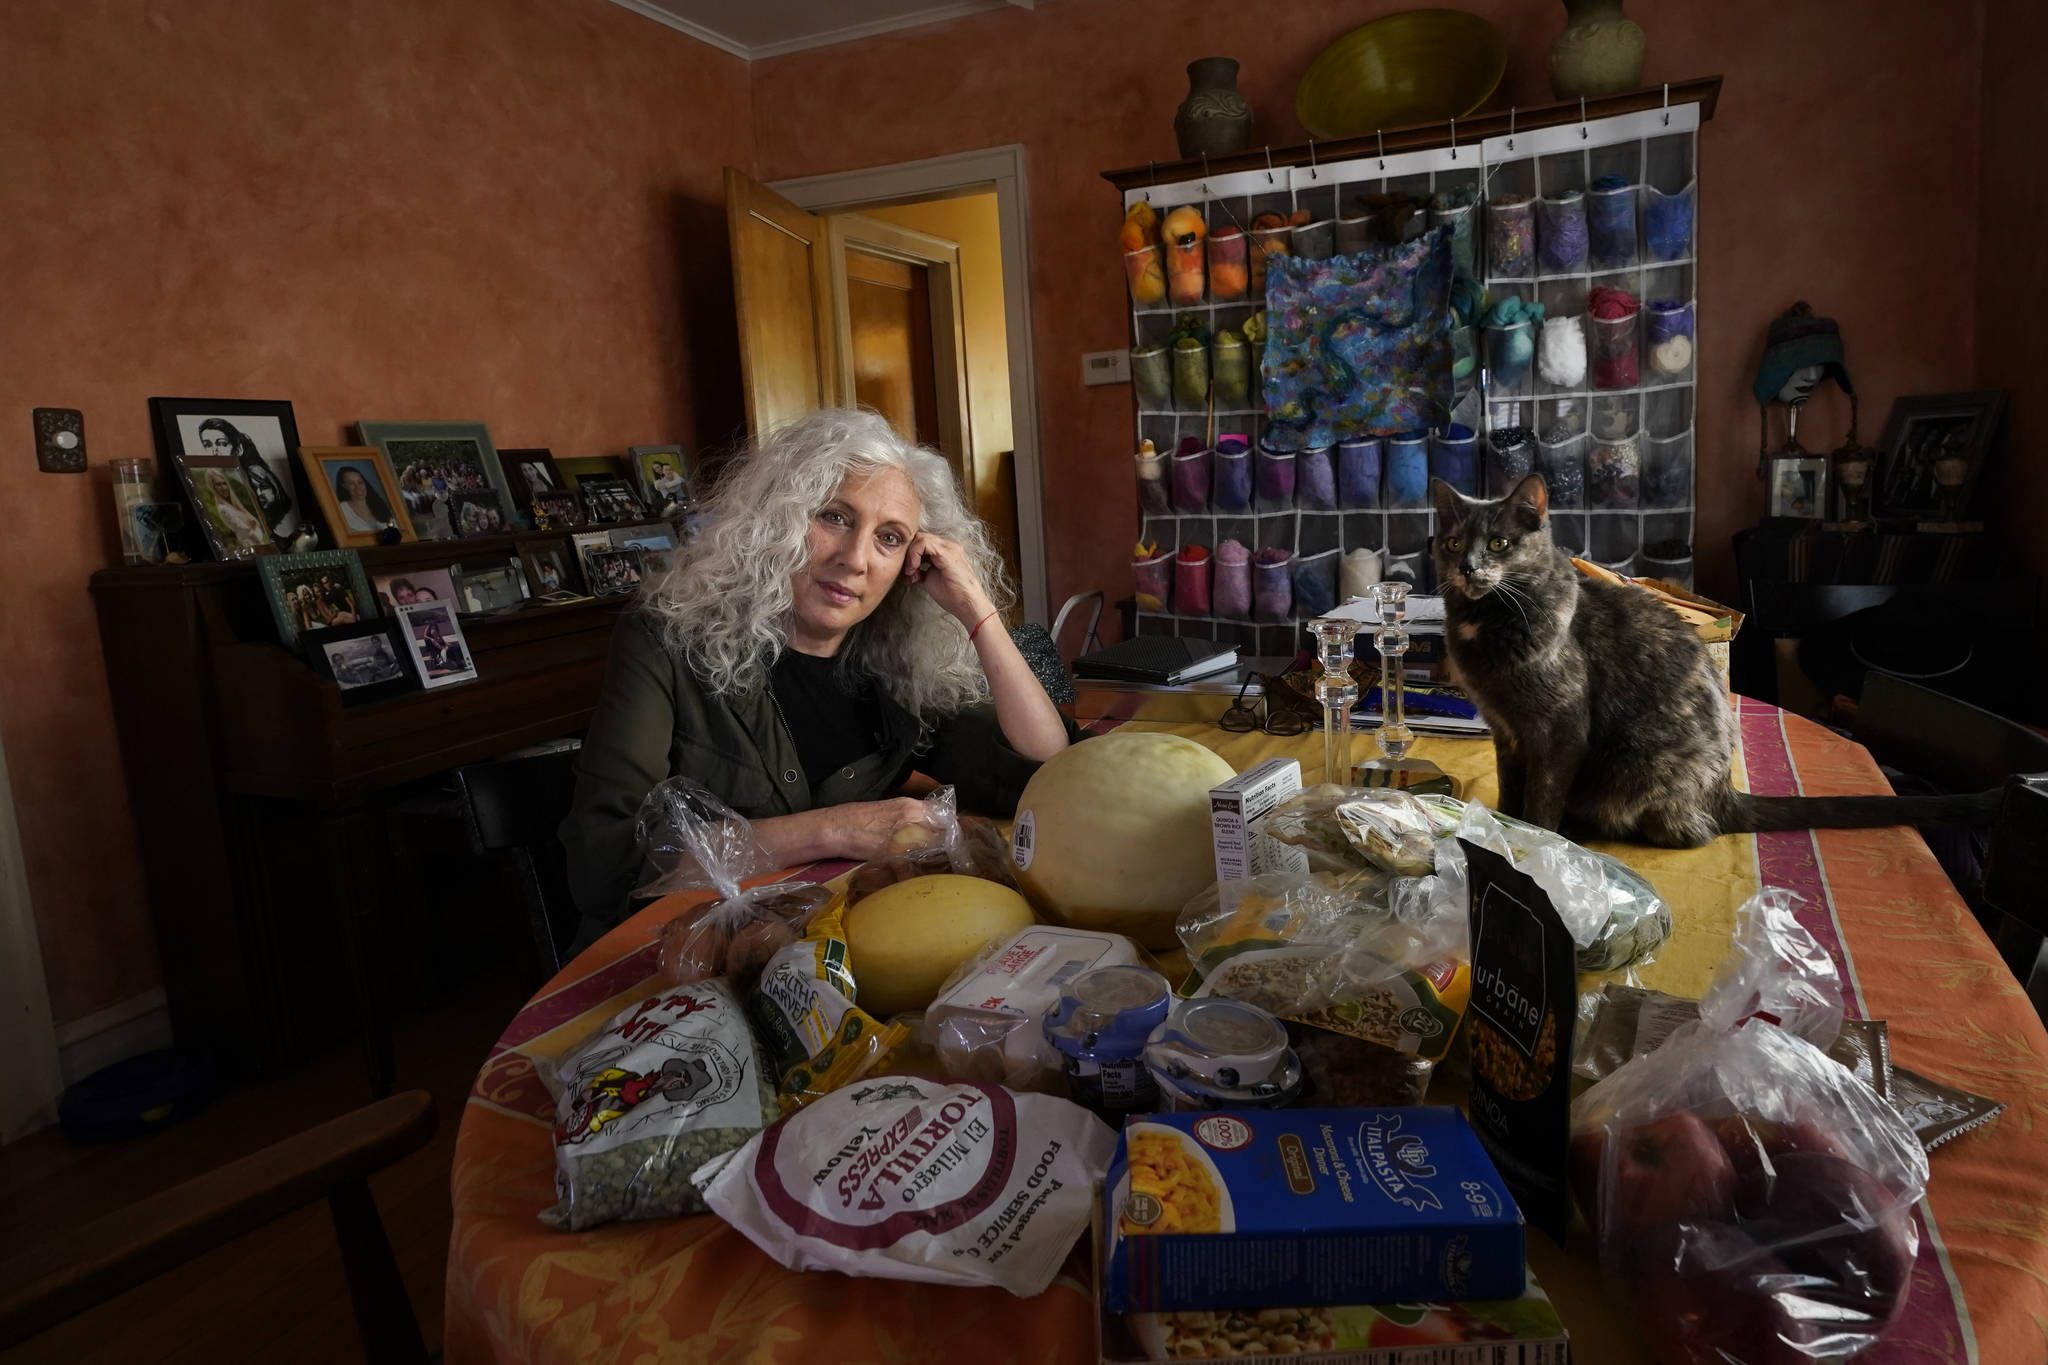 Phyllis Marder poses with her cat, Nellie, with food she recently obtained from a local food bank in the dining room of her home in Evanston, Ill., on Thursday, Nov. 5, 2020. At first, Marder, 66, didn’t tell anyone about going to food pantries. Then she had a change of heart. “Keeping a secret makes things get worse,” she says ’”… and makes me feel worse about myself, and so I decided that it was more important to talk about it.” (AP Photo/Charles Rex Arbogast)